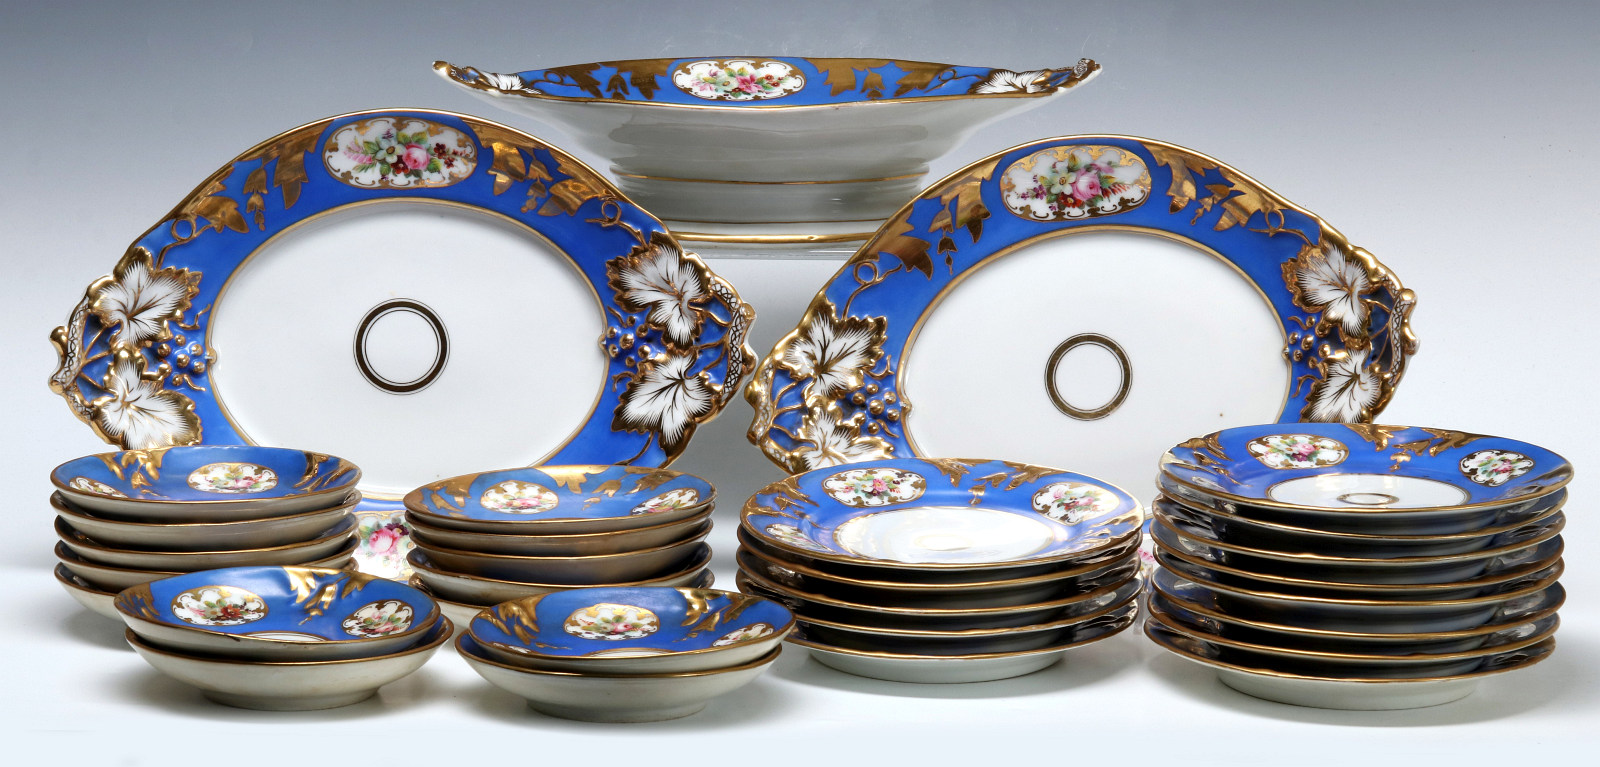 AN INCOMPLETE 19TH C. FRENCH OLD PARIS DESERT SET